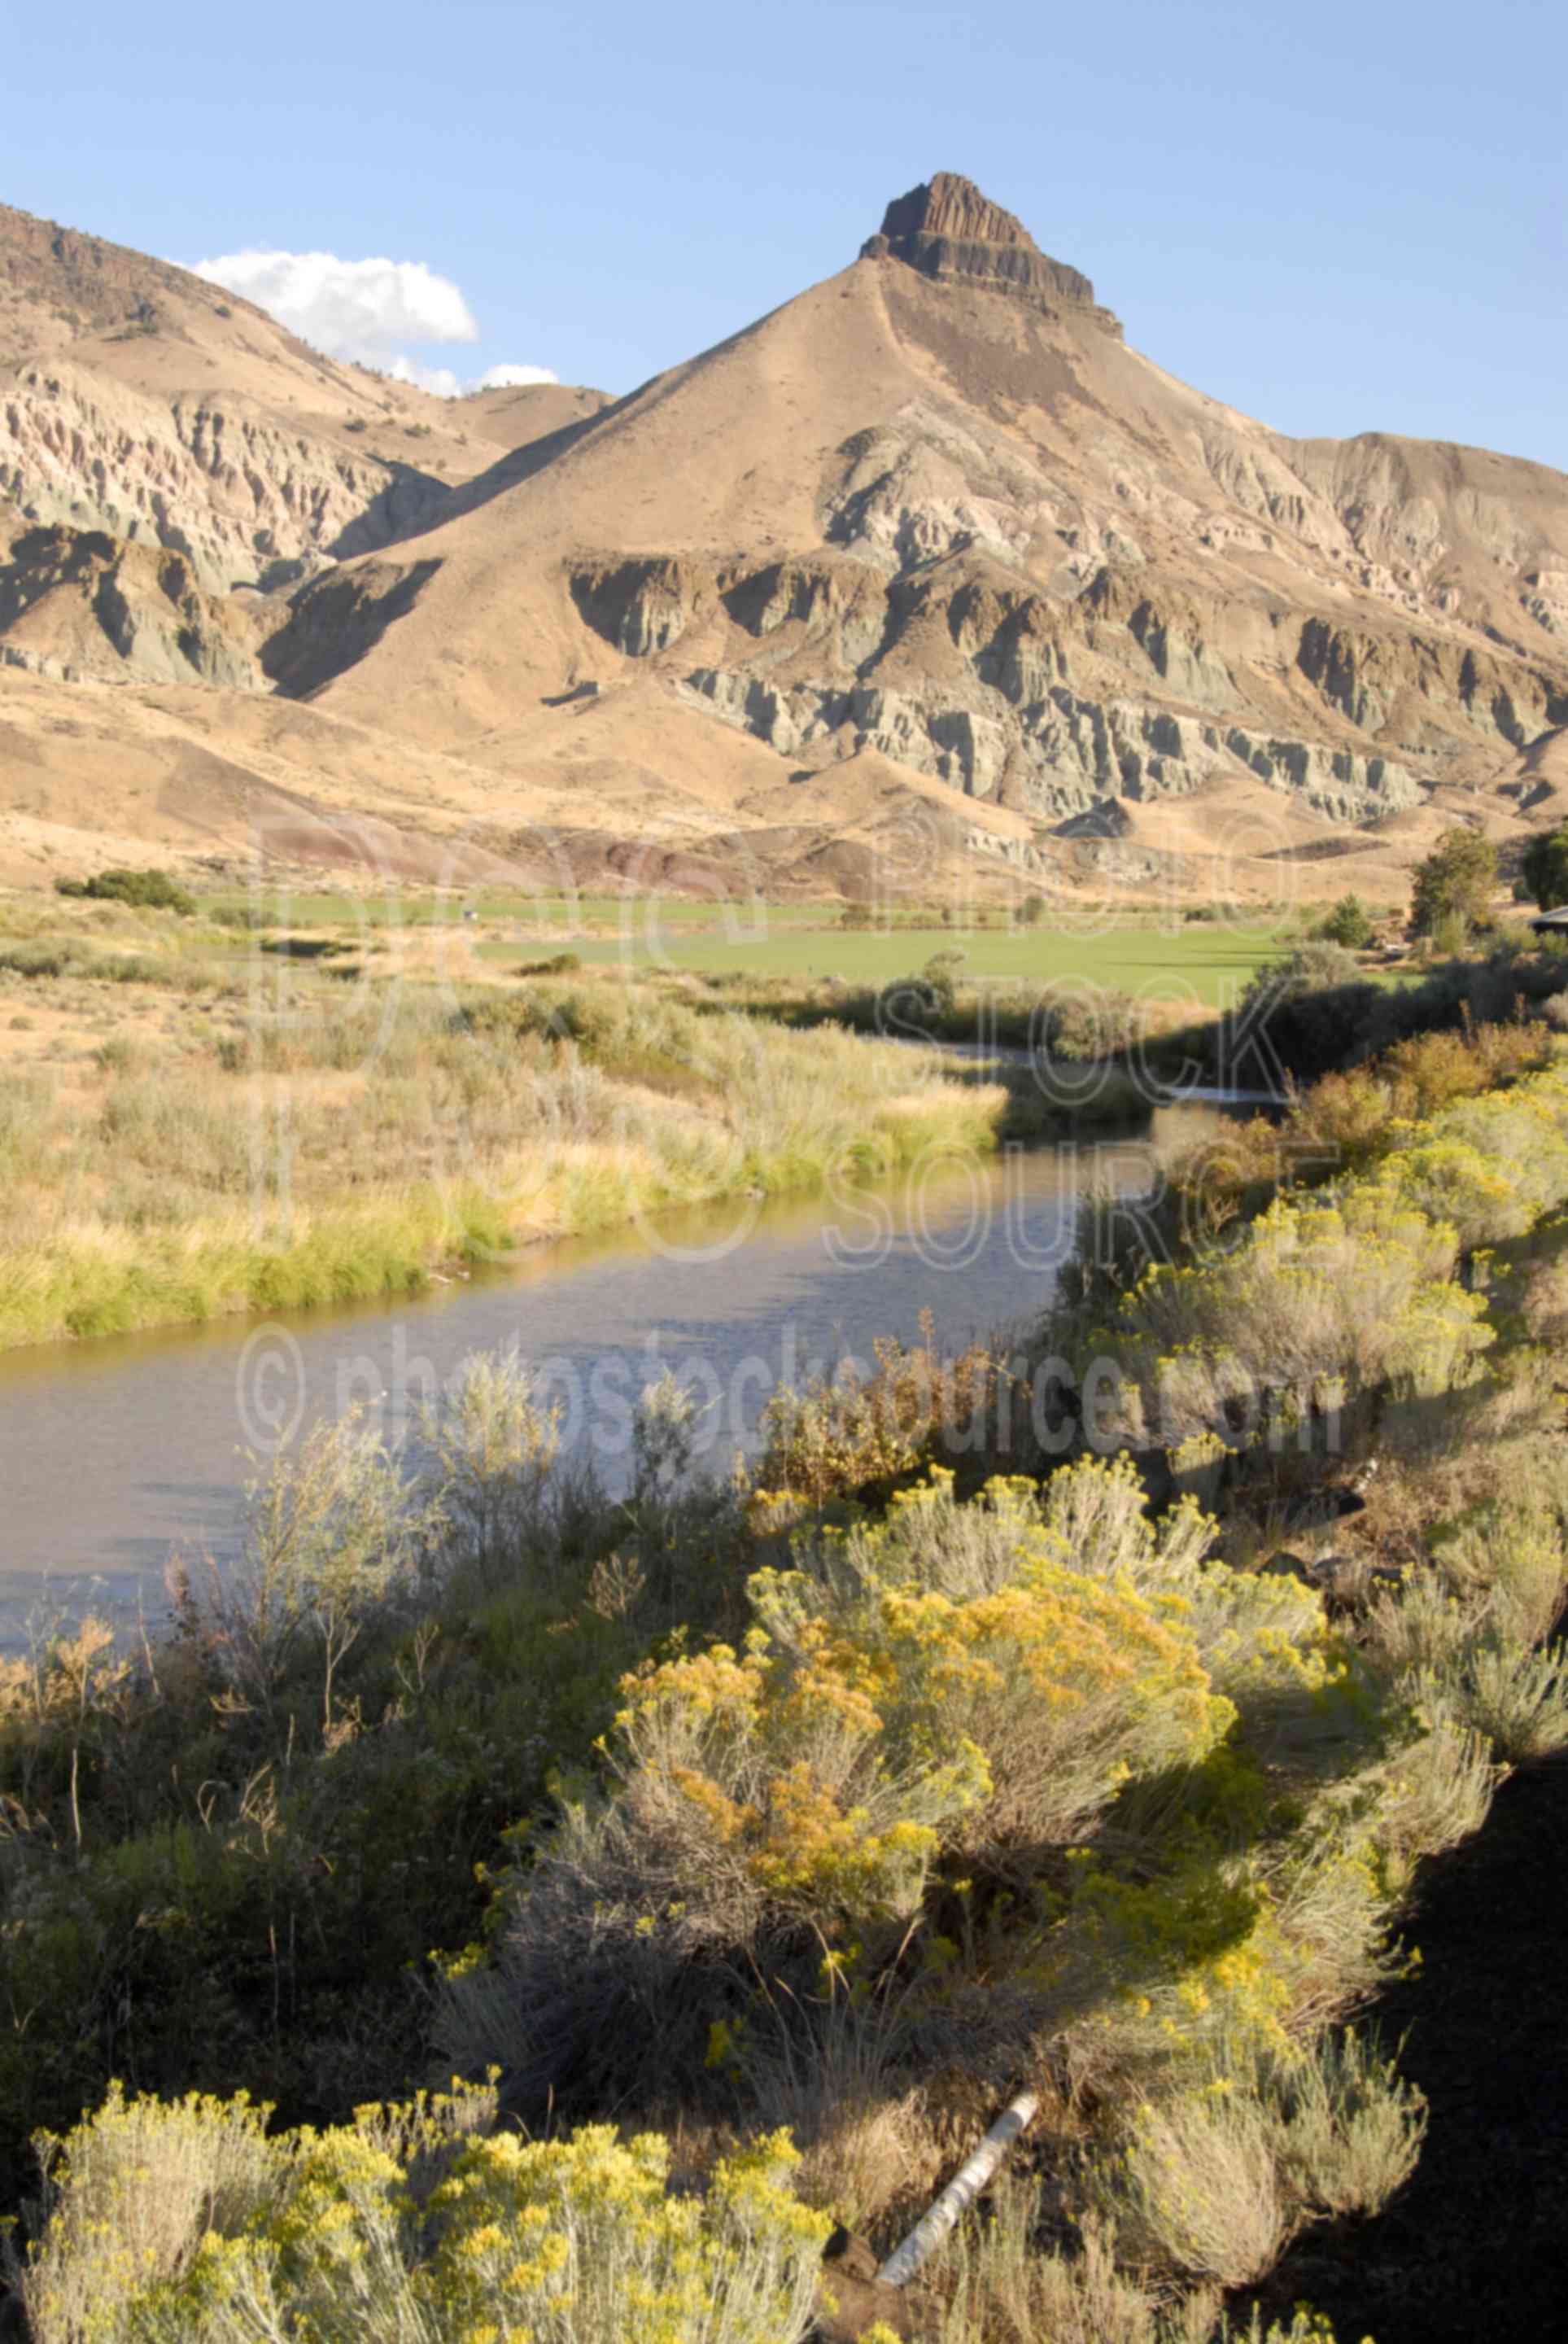 Sheep Rock,john day river,national monument,john day fossil beds,lakes rivers